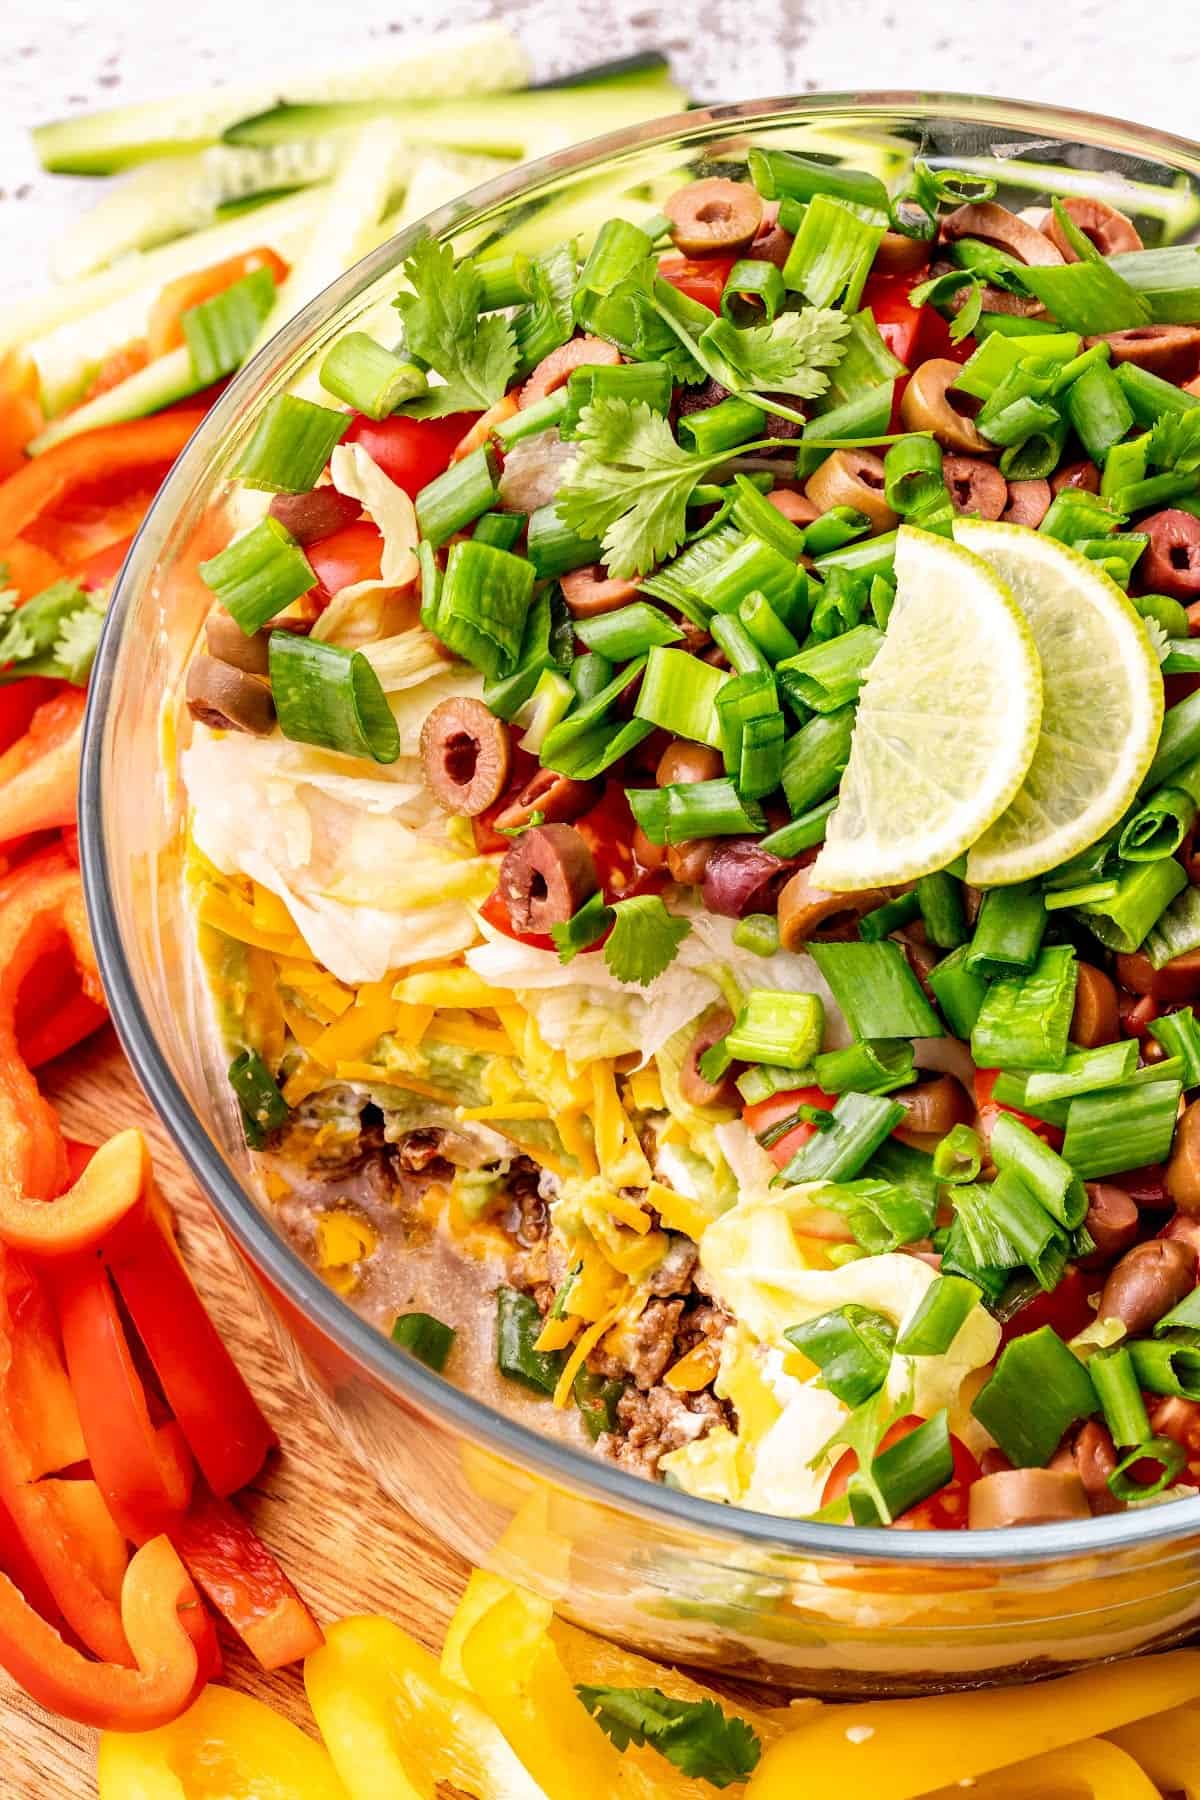 Overhead view of a bowl of 7 layer dip, topped with lime slices, with some scoops taken out, surrounded by bell pepper slices